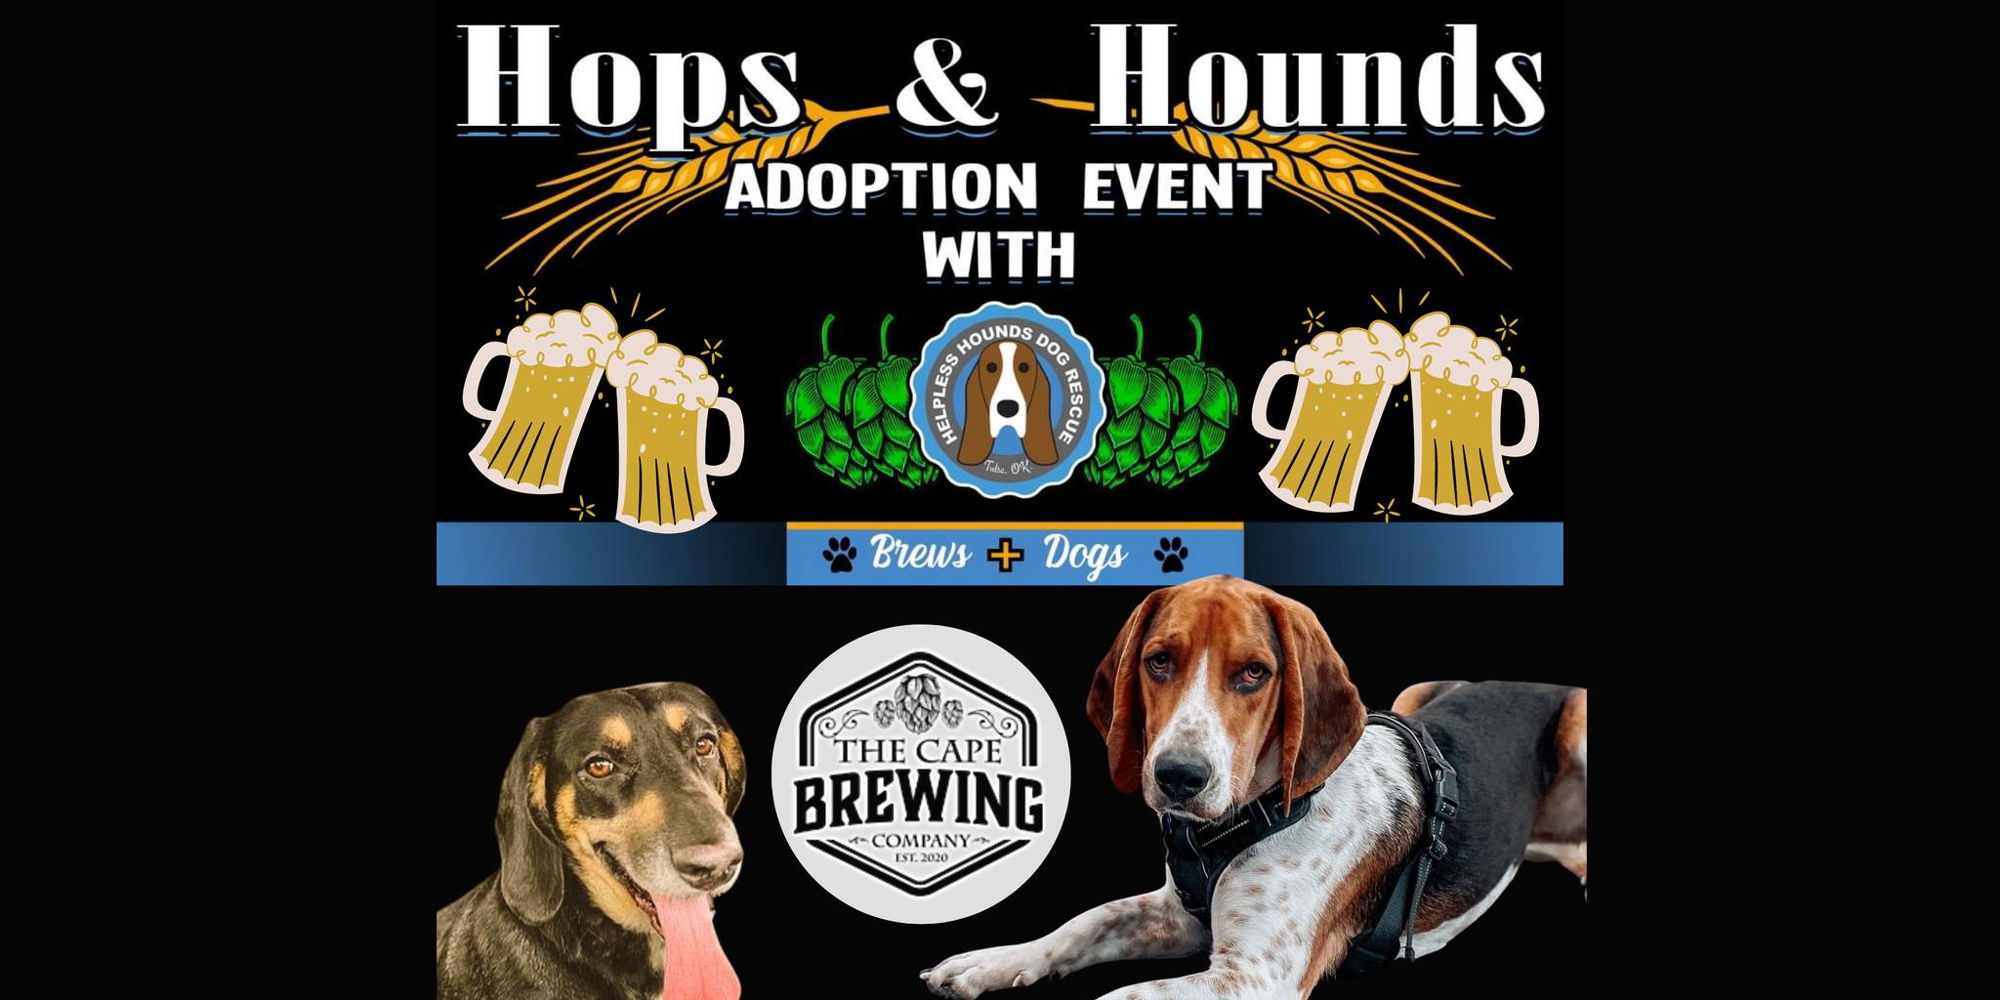 Coonhounds at The Cape Brewing promotional image